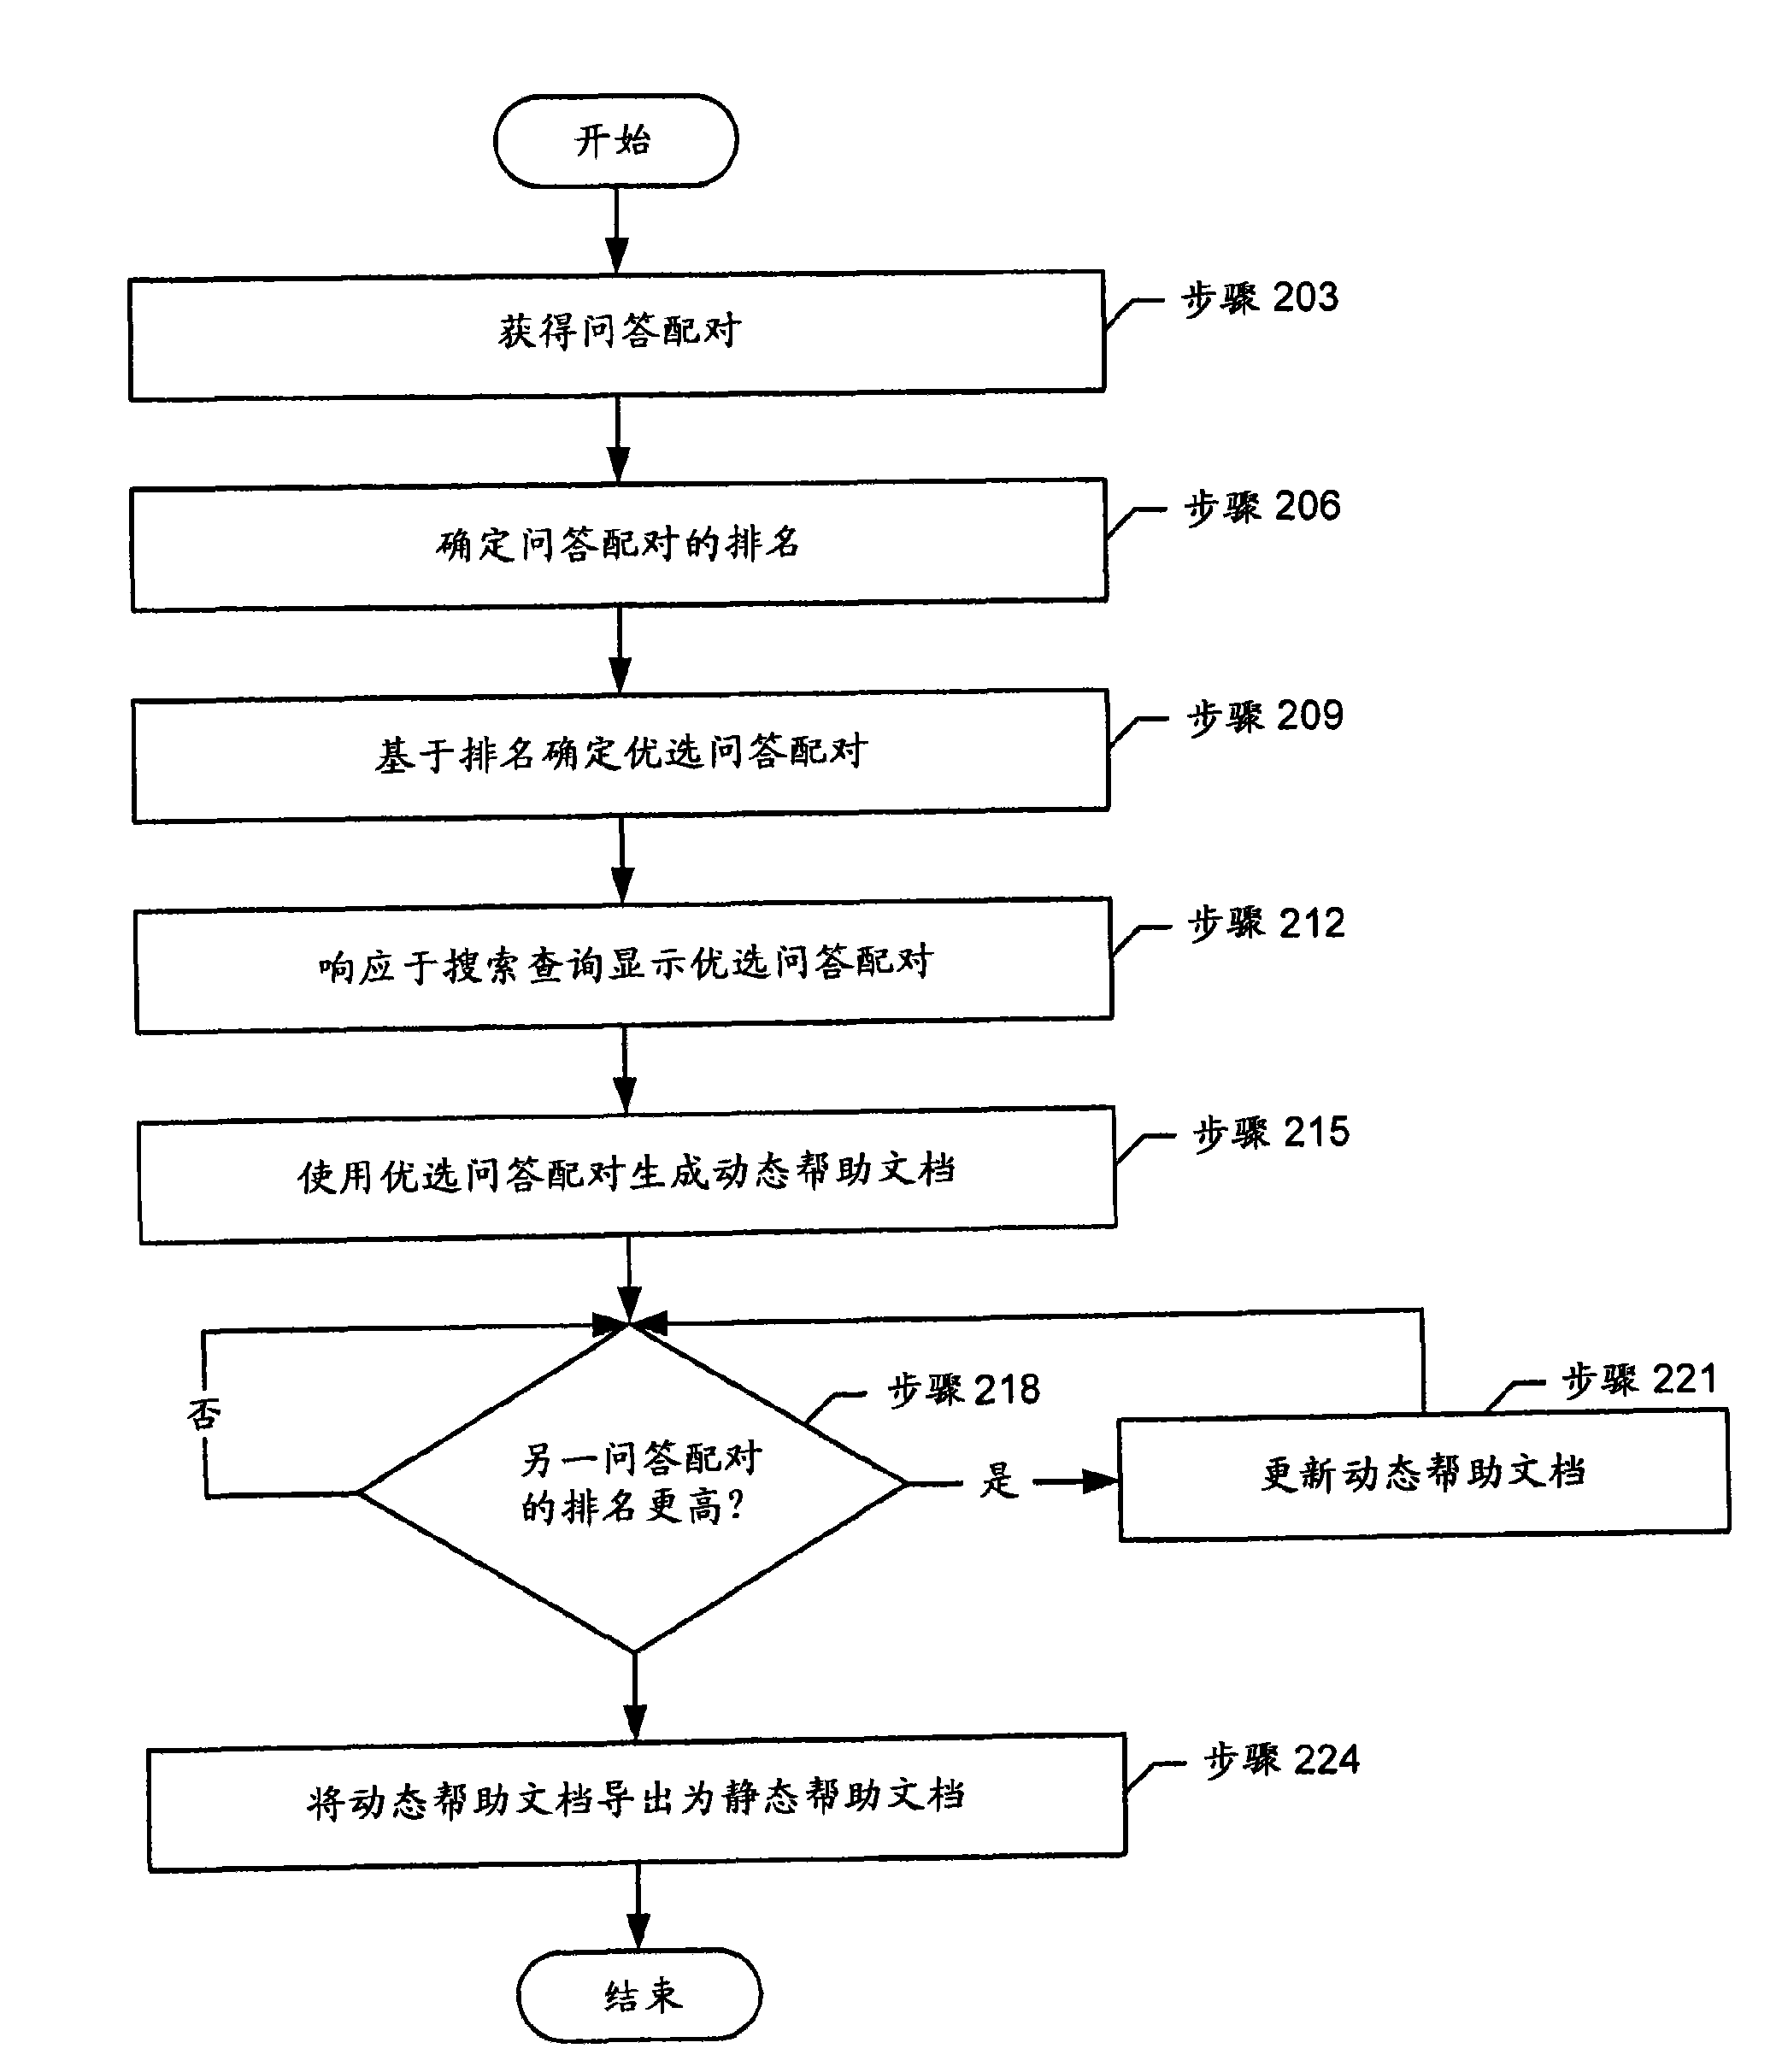 Method and system for generating a dynamic help document